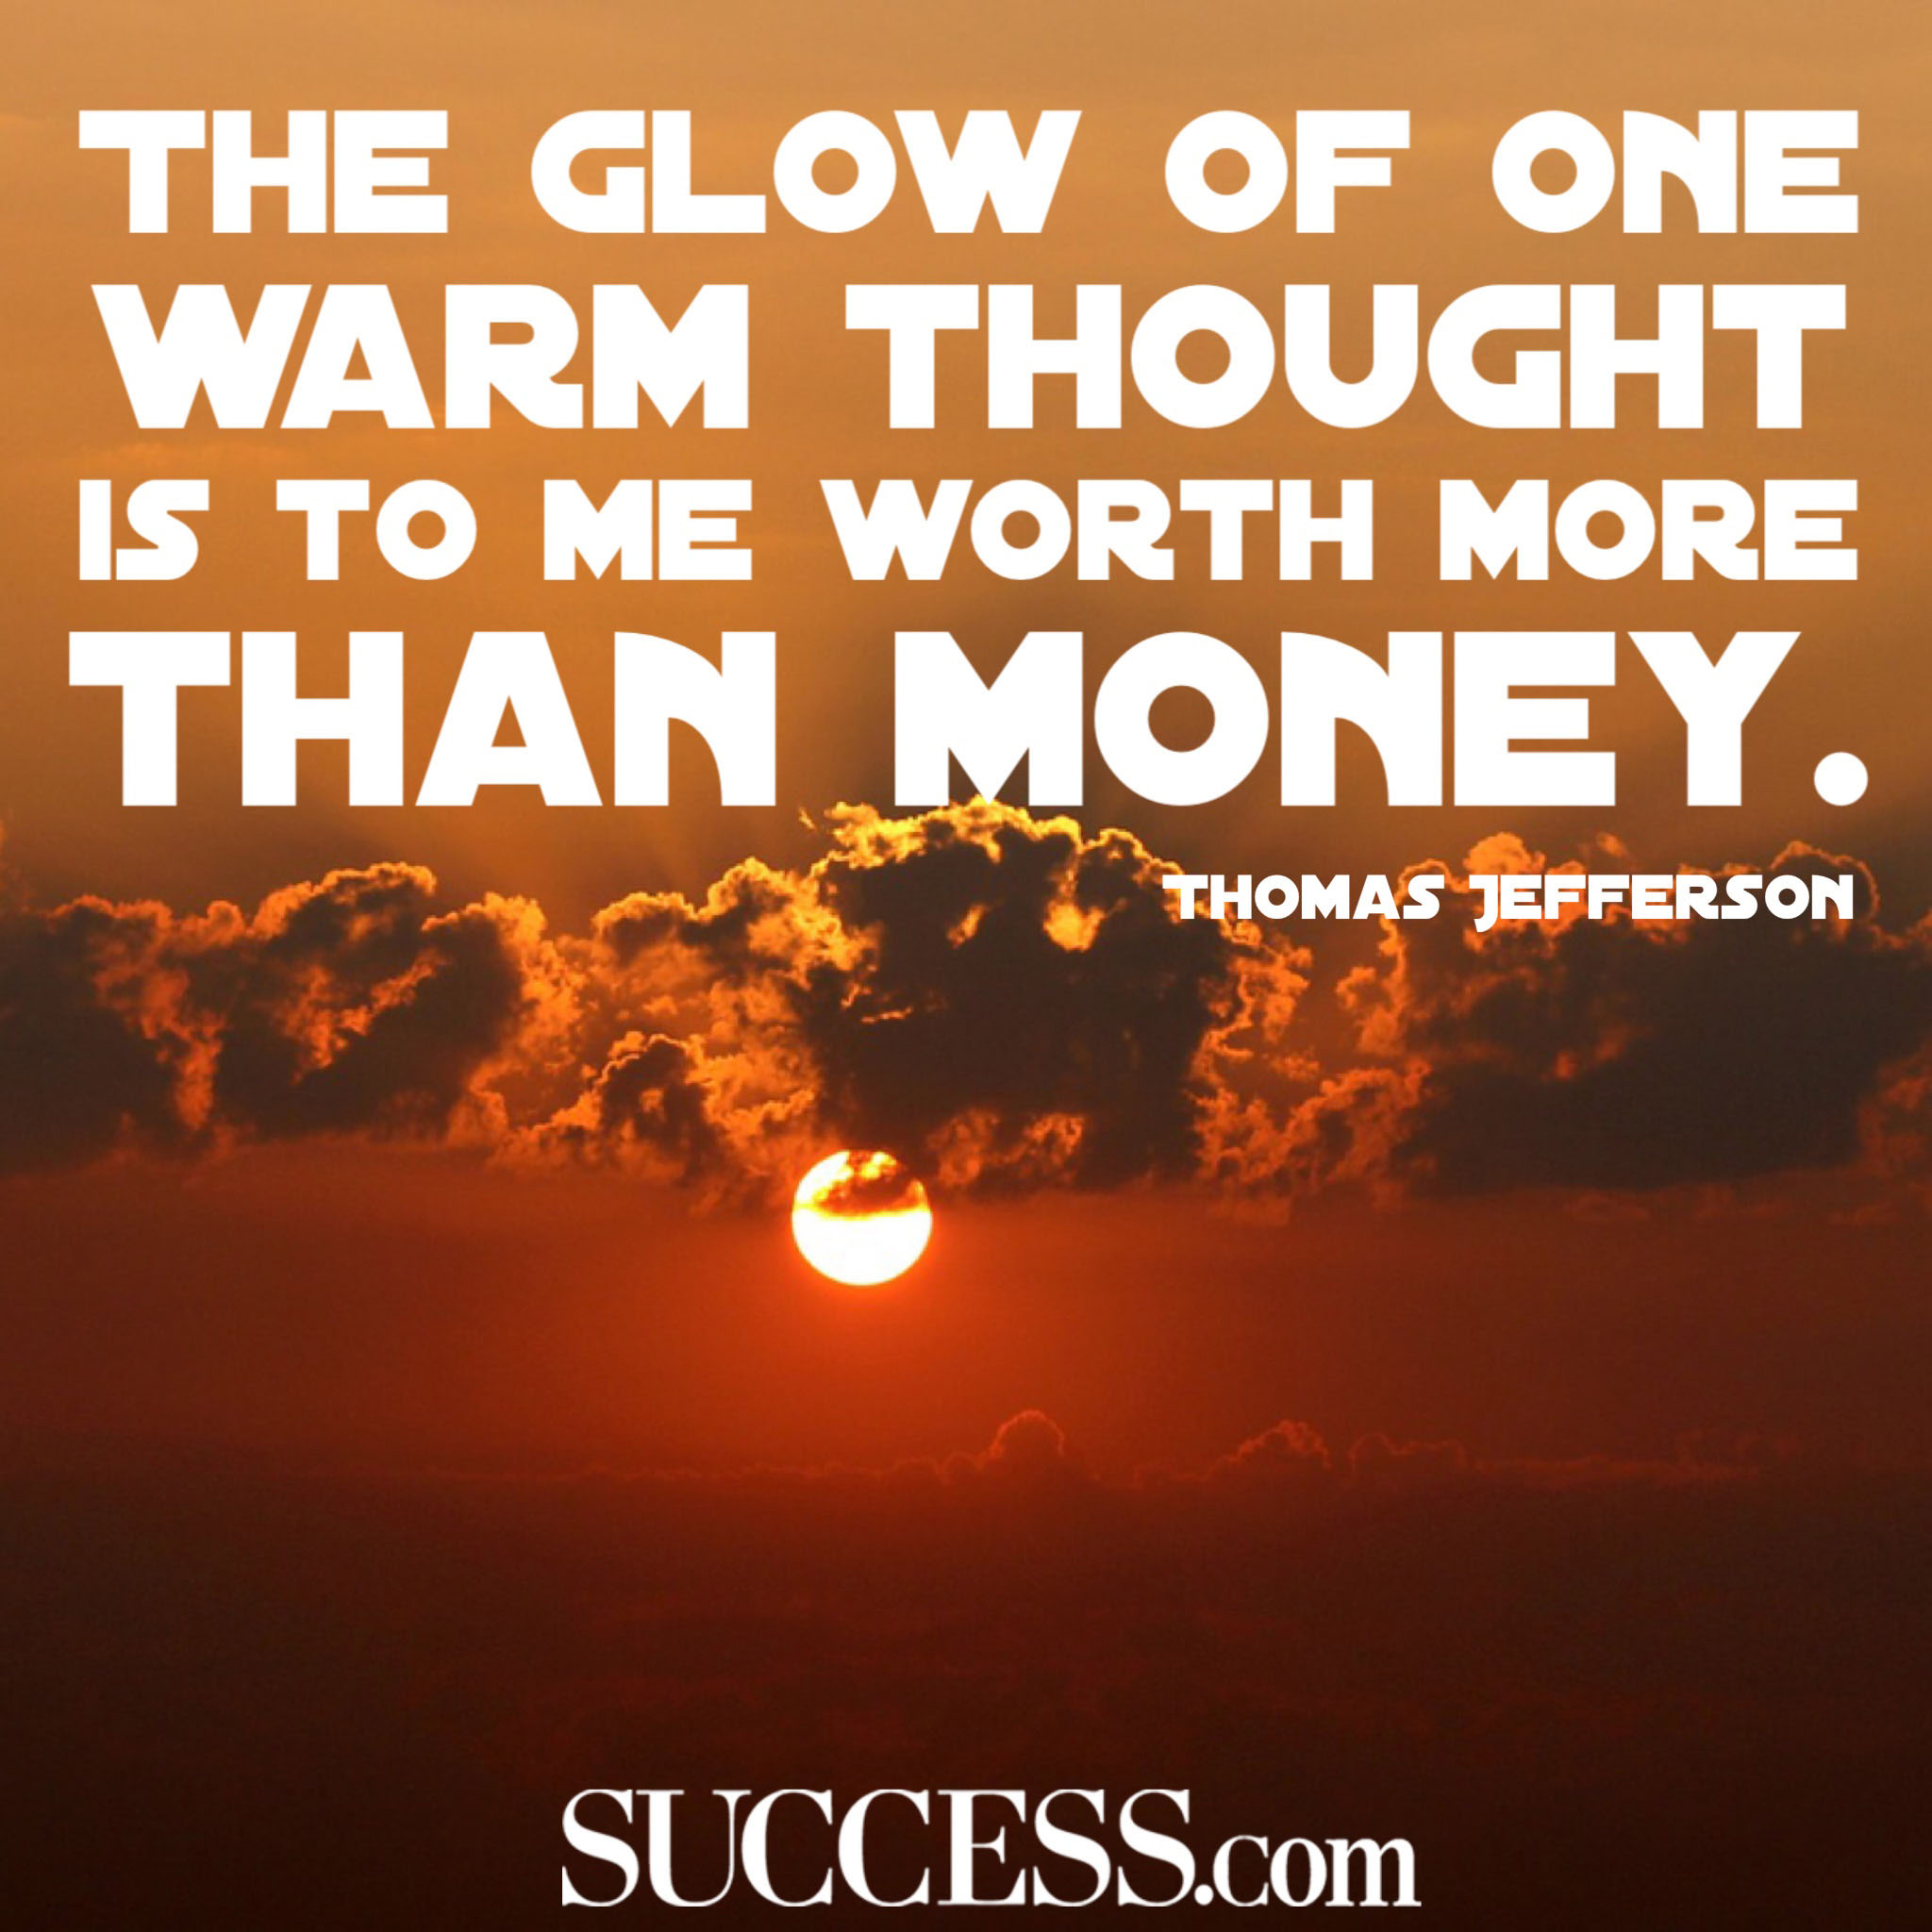 The glow of one warm thought is to me worth more than money. Thomas Jefferson